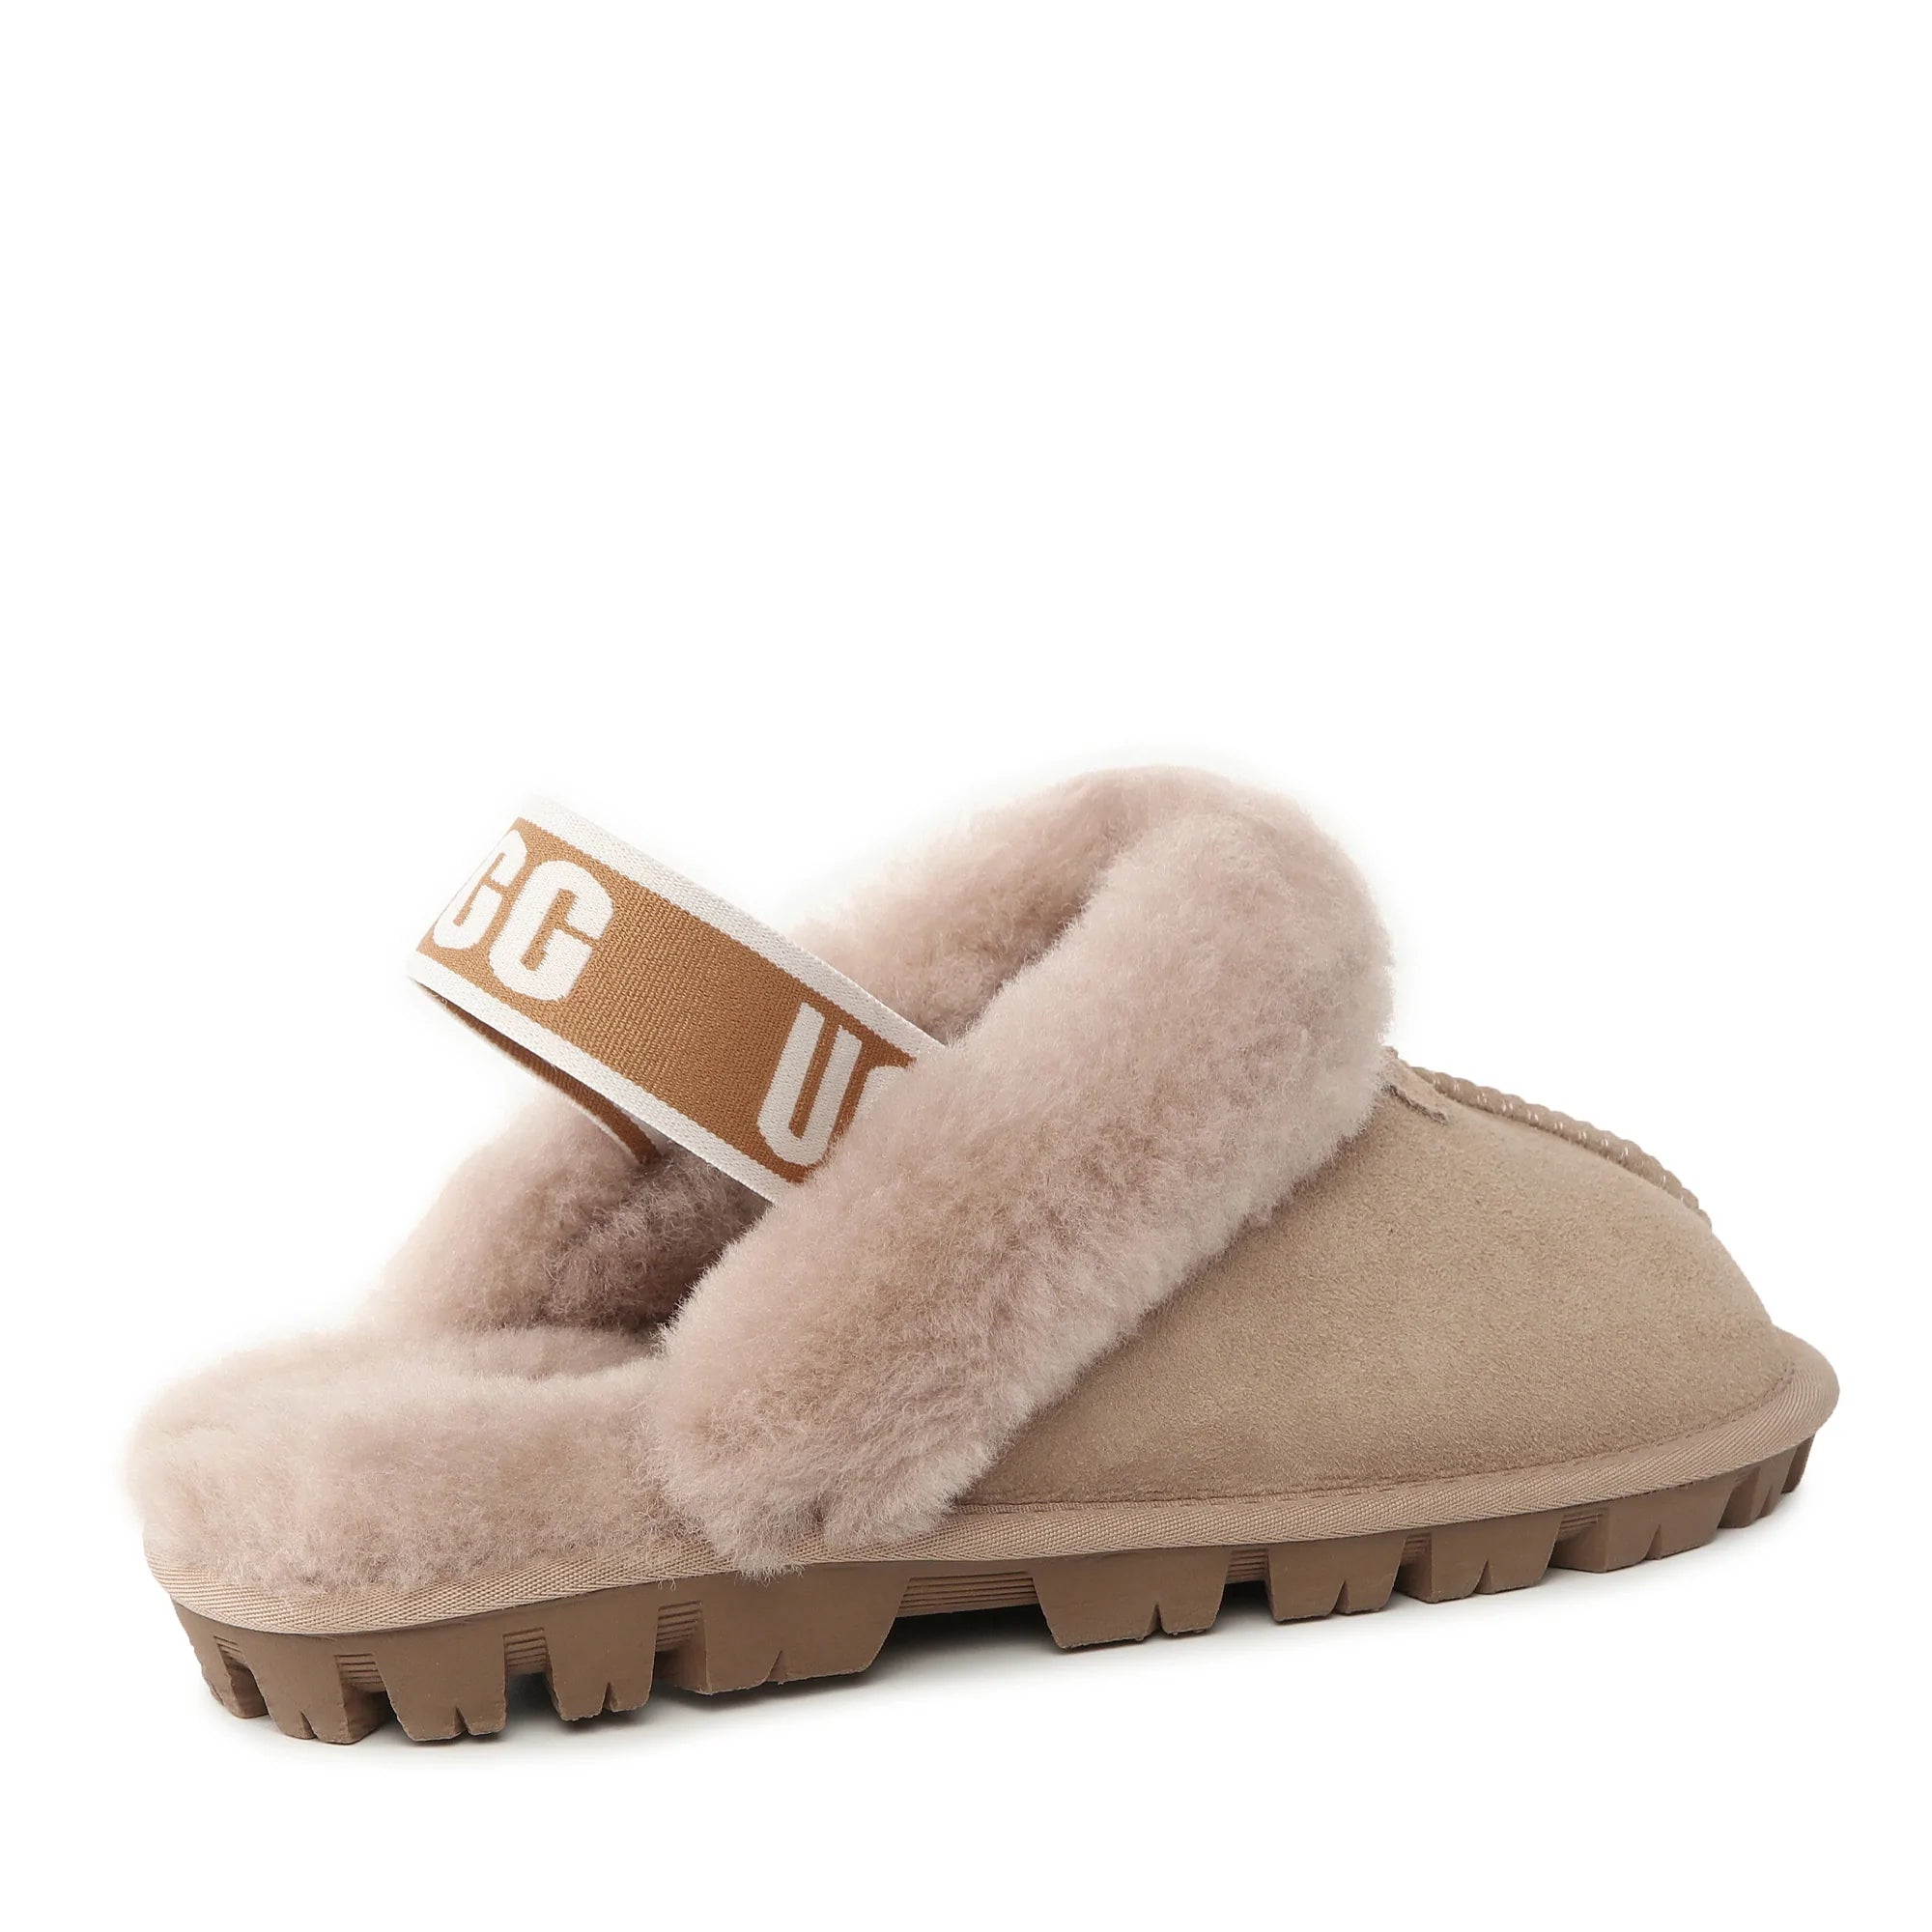 Top more than 86 ugg ansley slippers latest